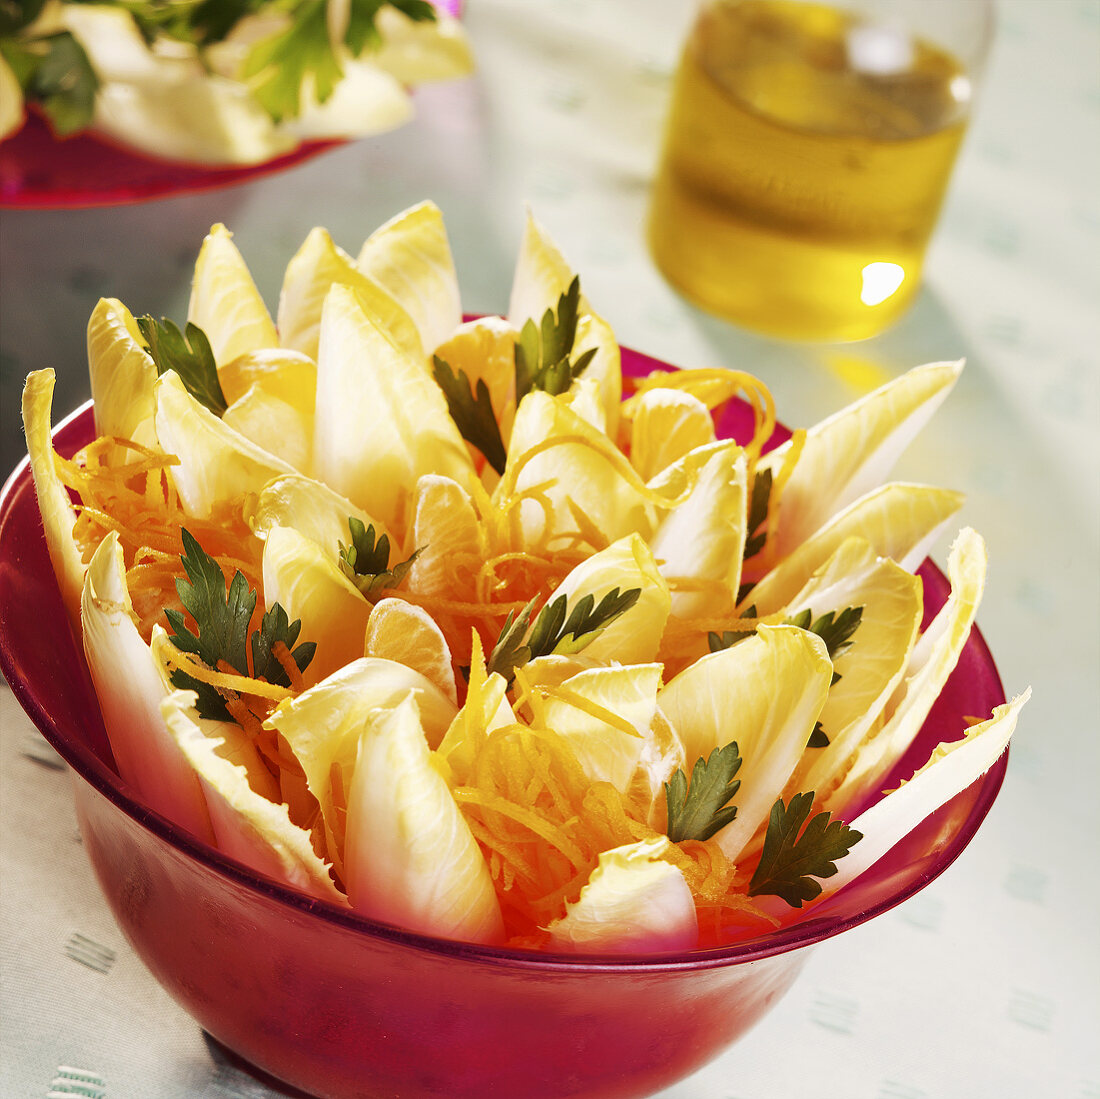 Chicory salad with carrots and clementines